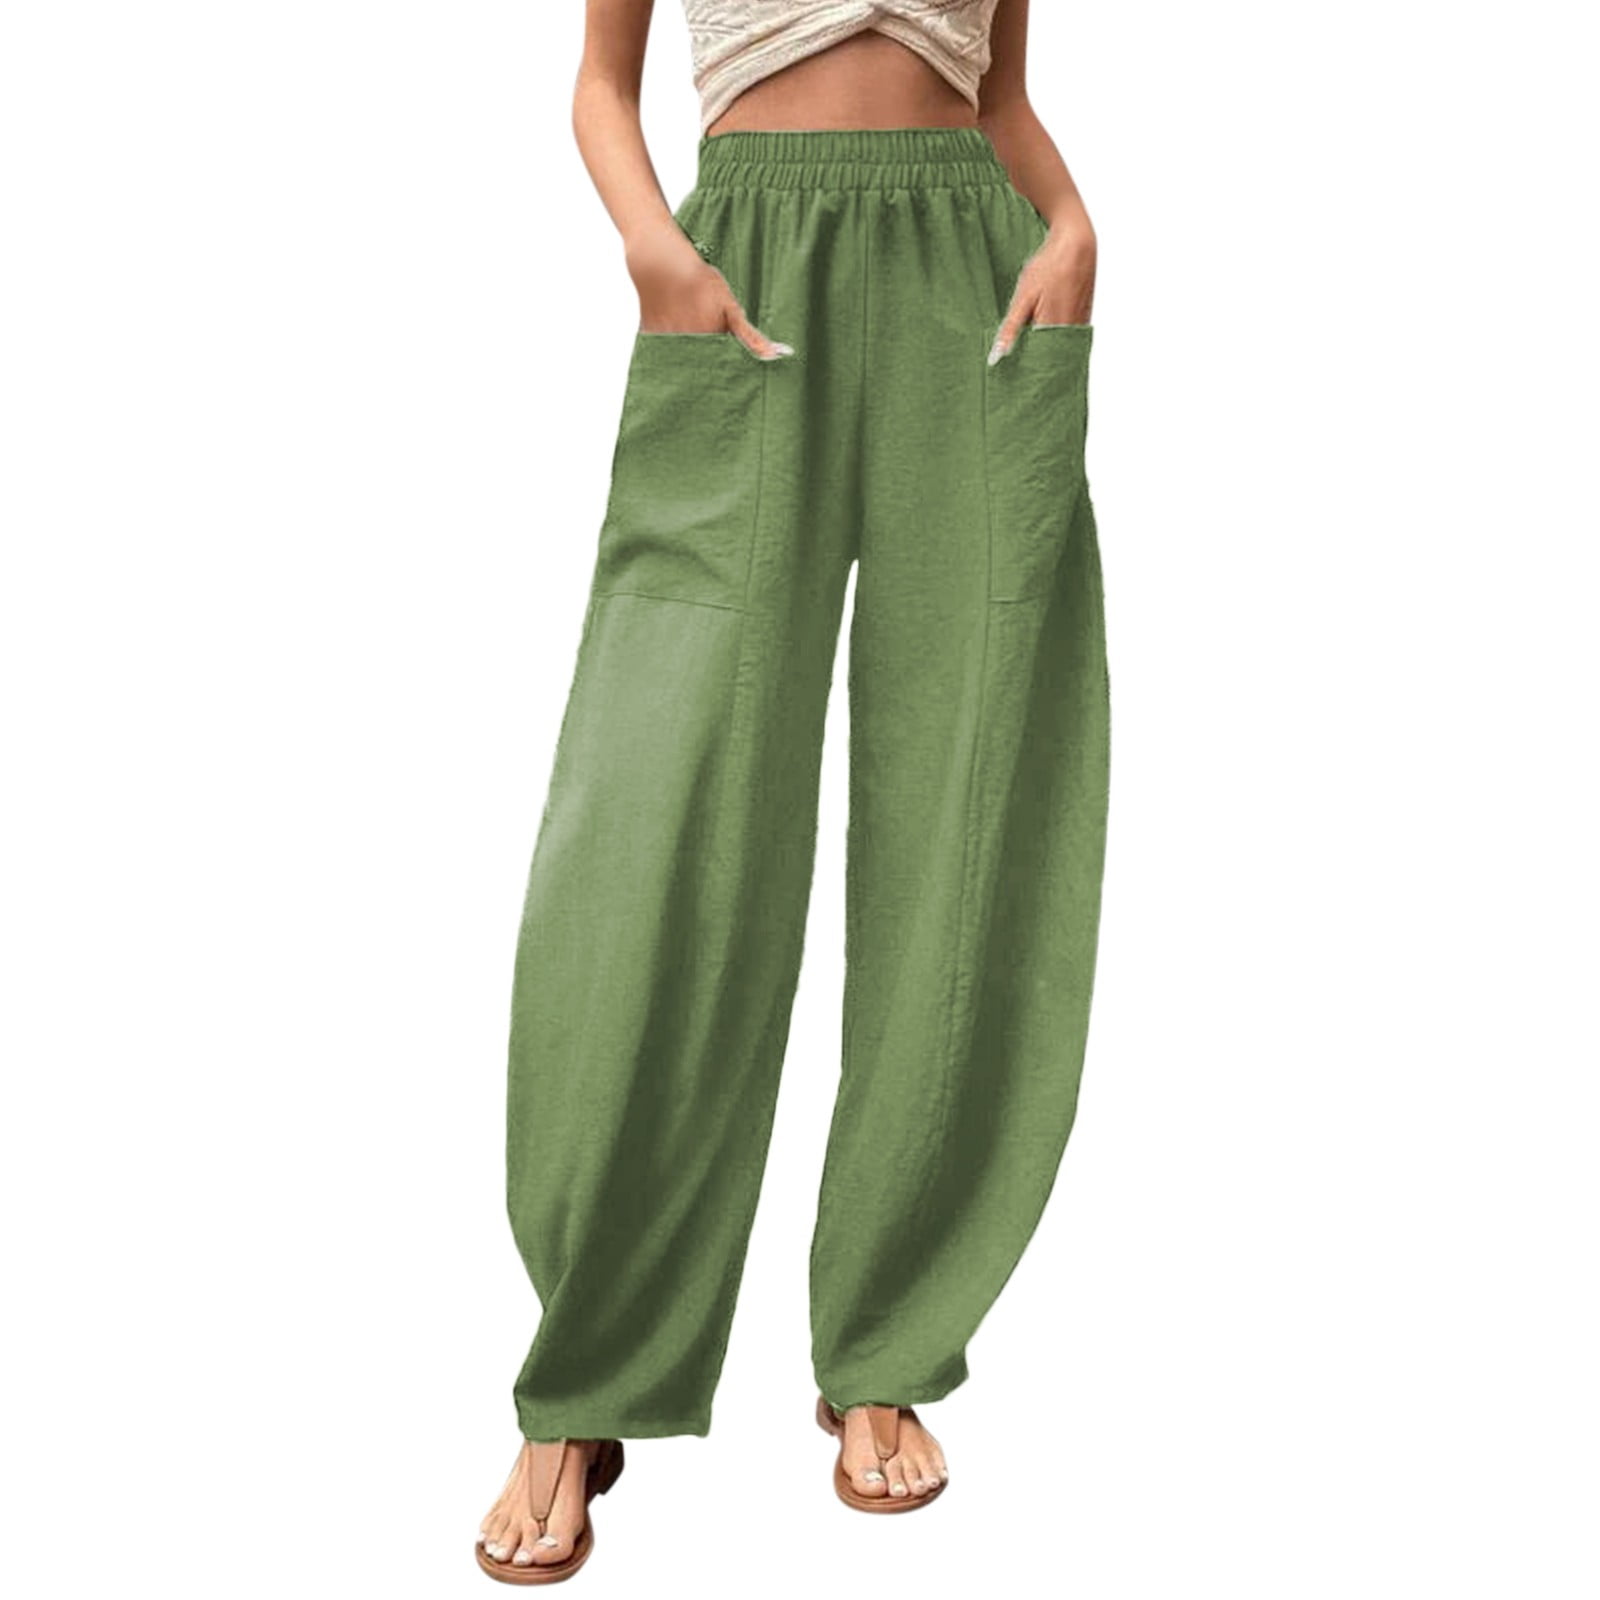 Wide Leg Pants for Women, Women'S Elastic High Waist Solid Color Casual  Loose Long Pants with Pockets Todays Daily Deals Of The Day Prime Today Only  Deals Under 20 Dollars #4 